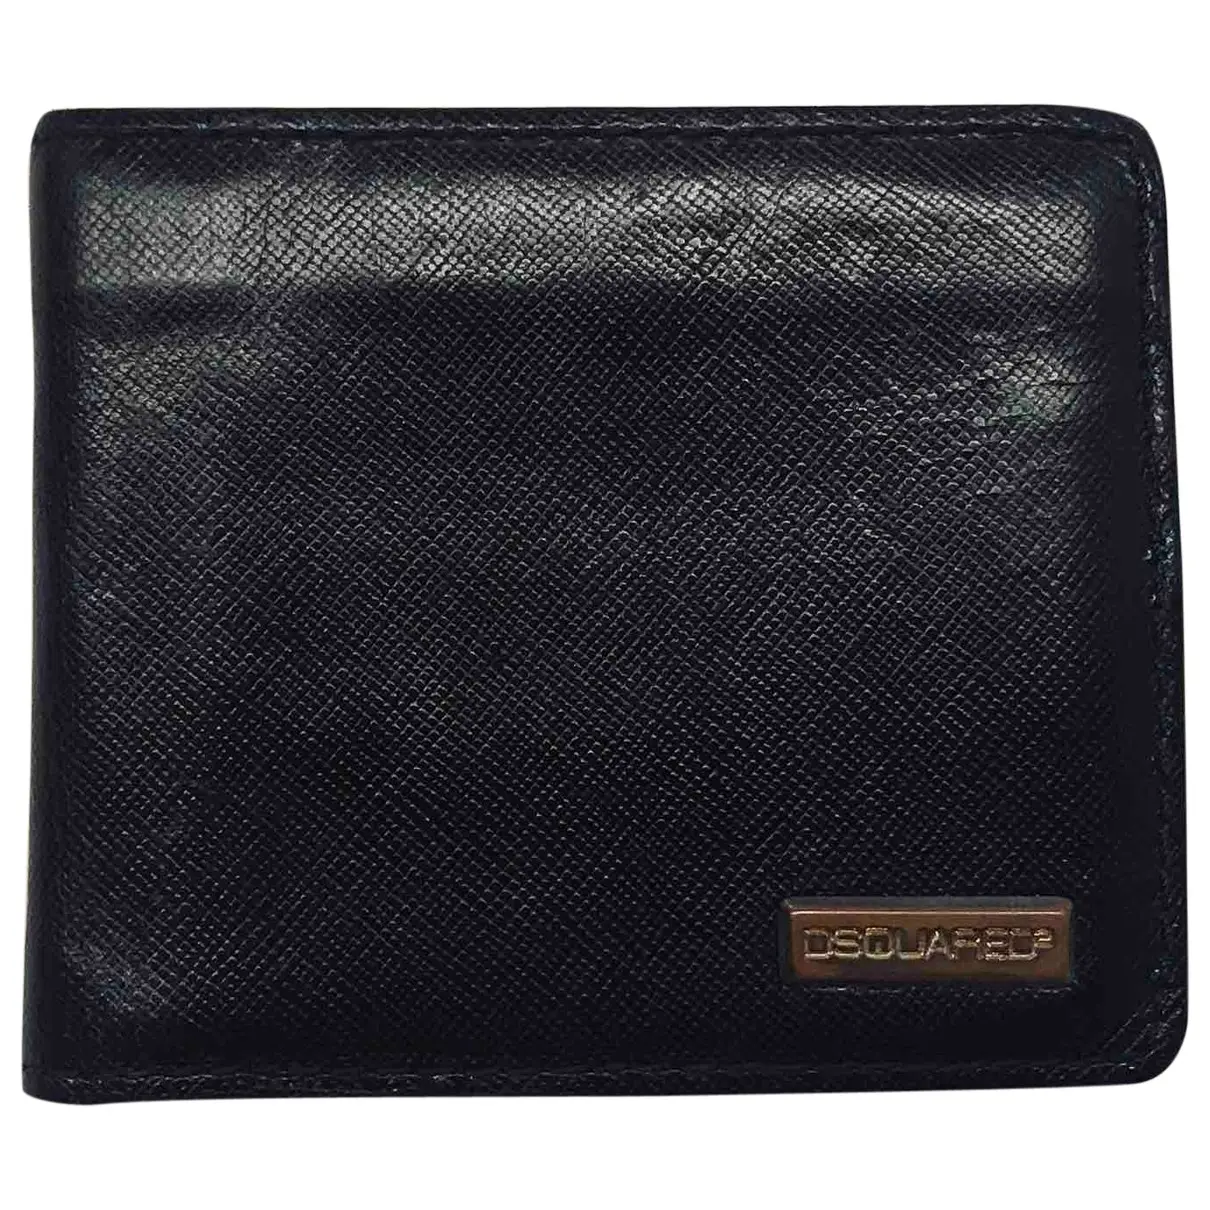 Leather small bag Dsquared2 - Vintage